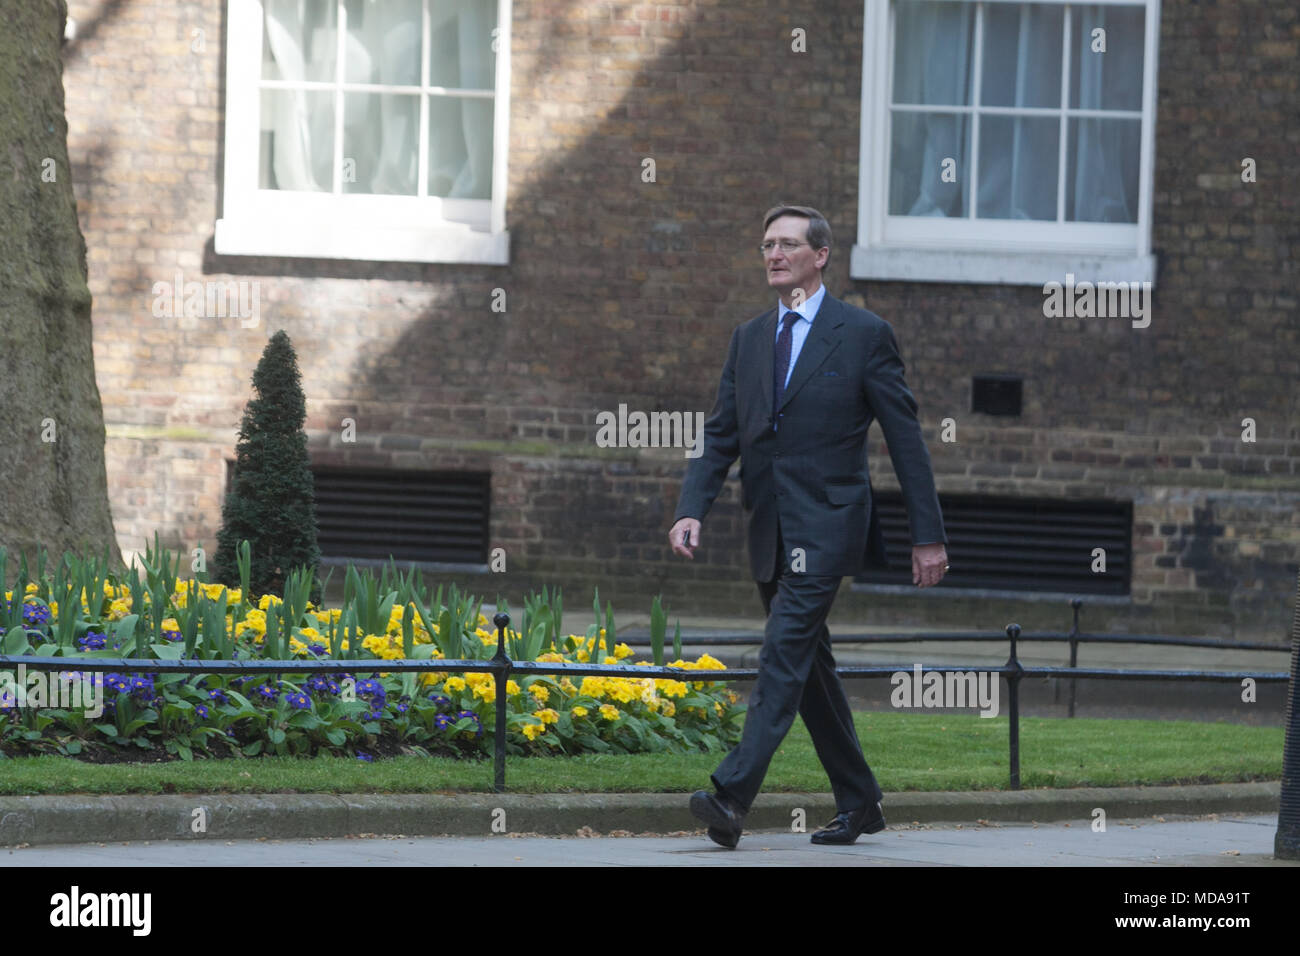 London UK. 18th April 2018. Dominic Grieve who was the former Conservative British Attorney General  who served in the David Cameron cabinet until 2014 and considered to be a Pro EU Remain supporter  arrives at Downing Street London Credit: amer ghazzal/Alamy Live News Stock Photo